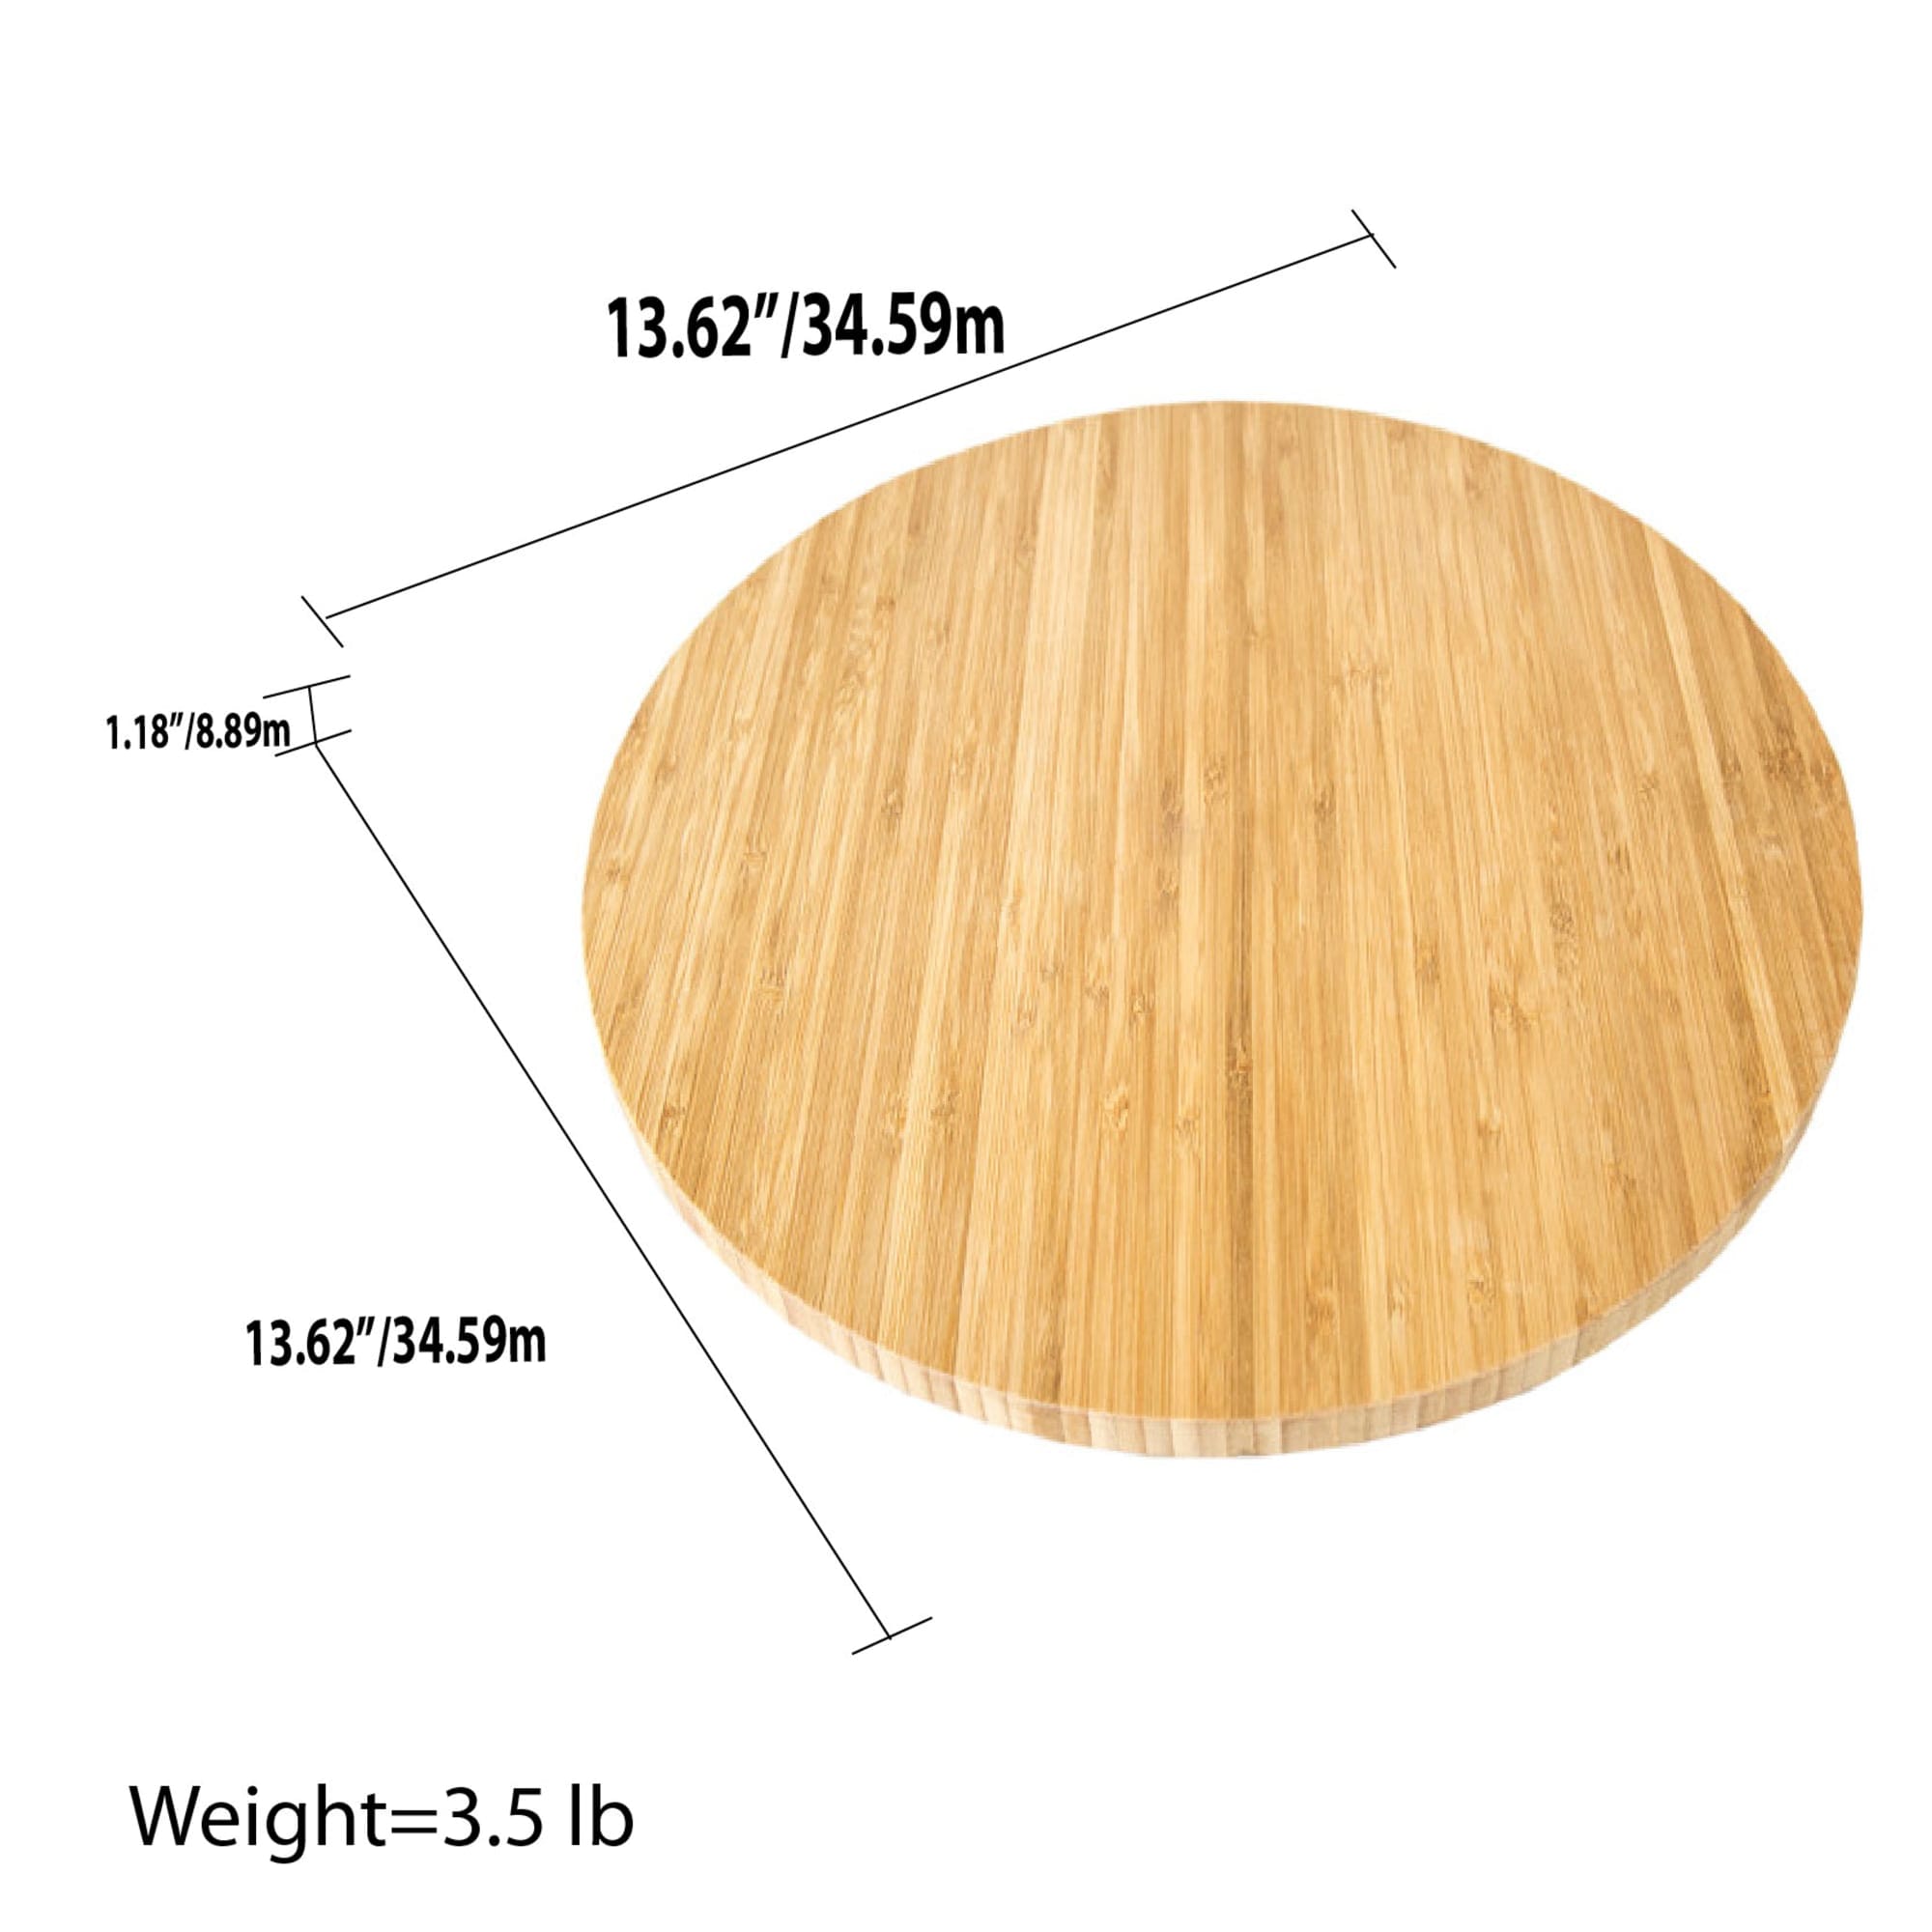 Home Basics Bamboo Lazy Susan, (13.5-inch Diameter) $10.00 EACH, CASE PACK OF 6